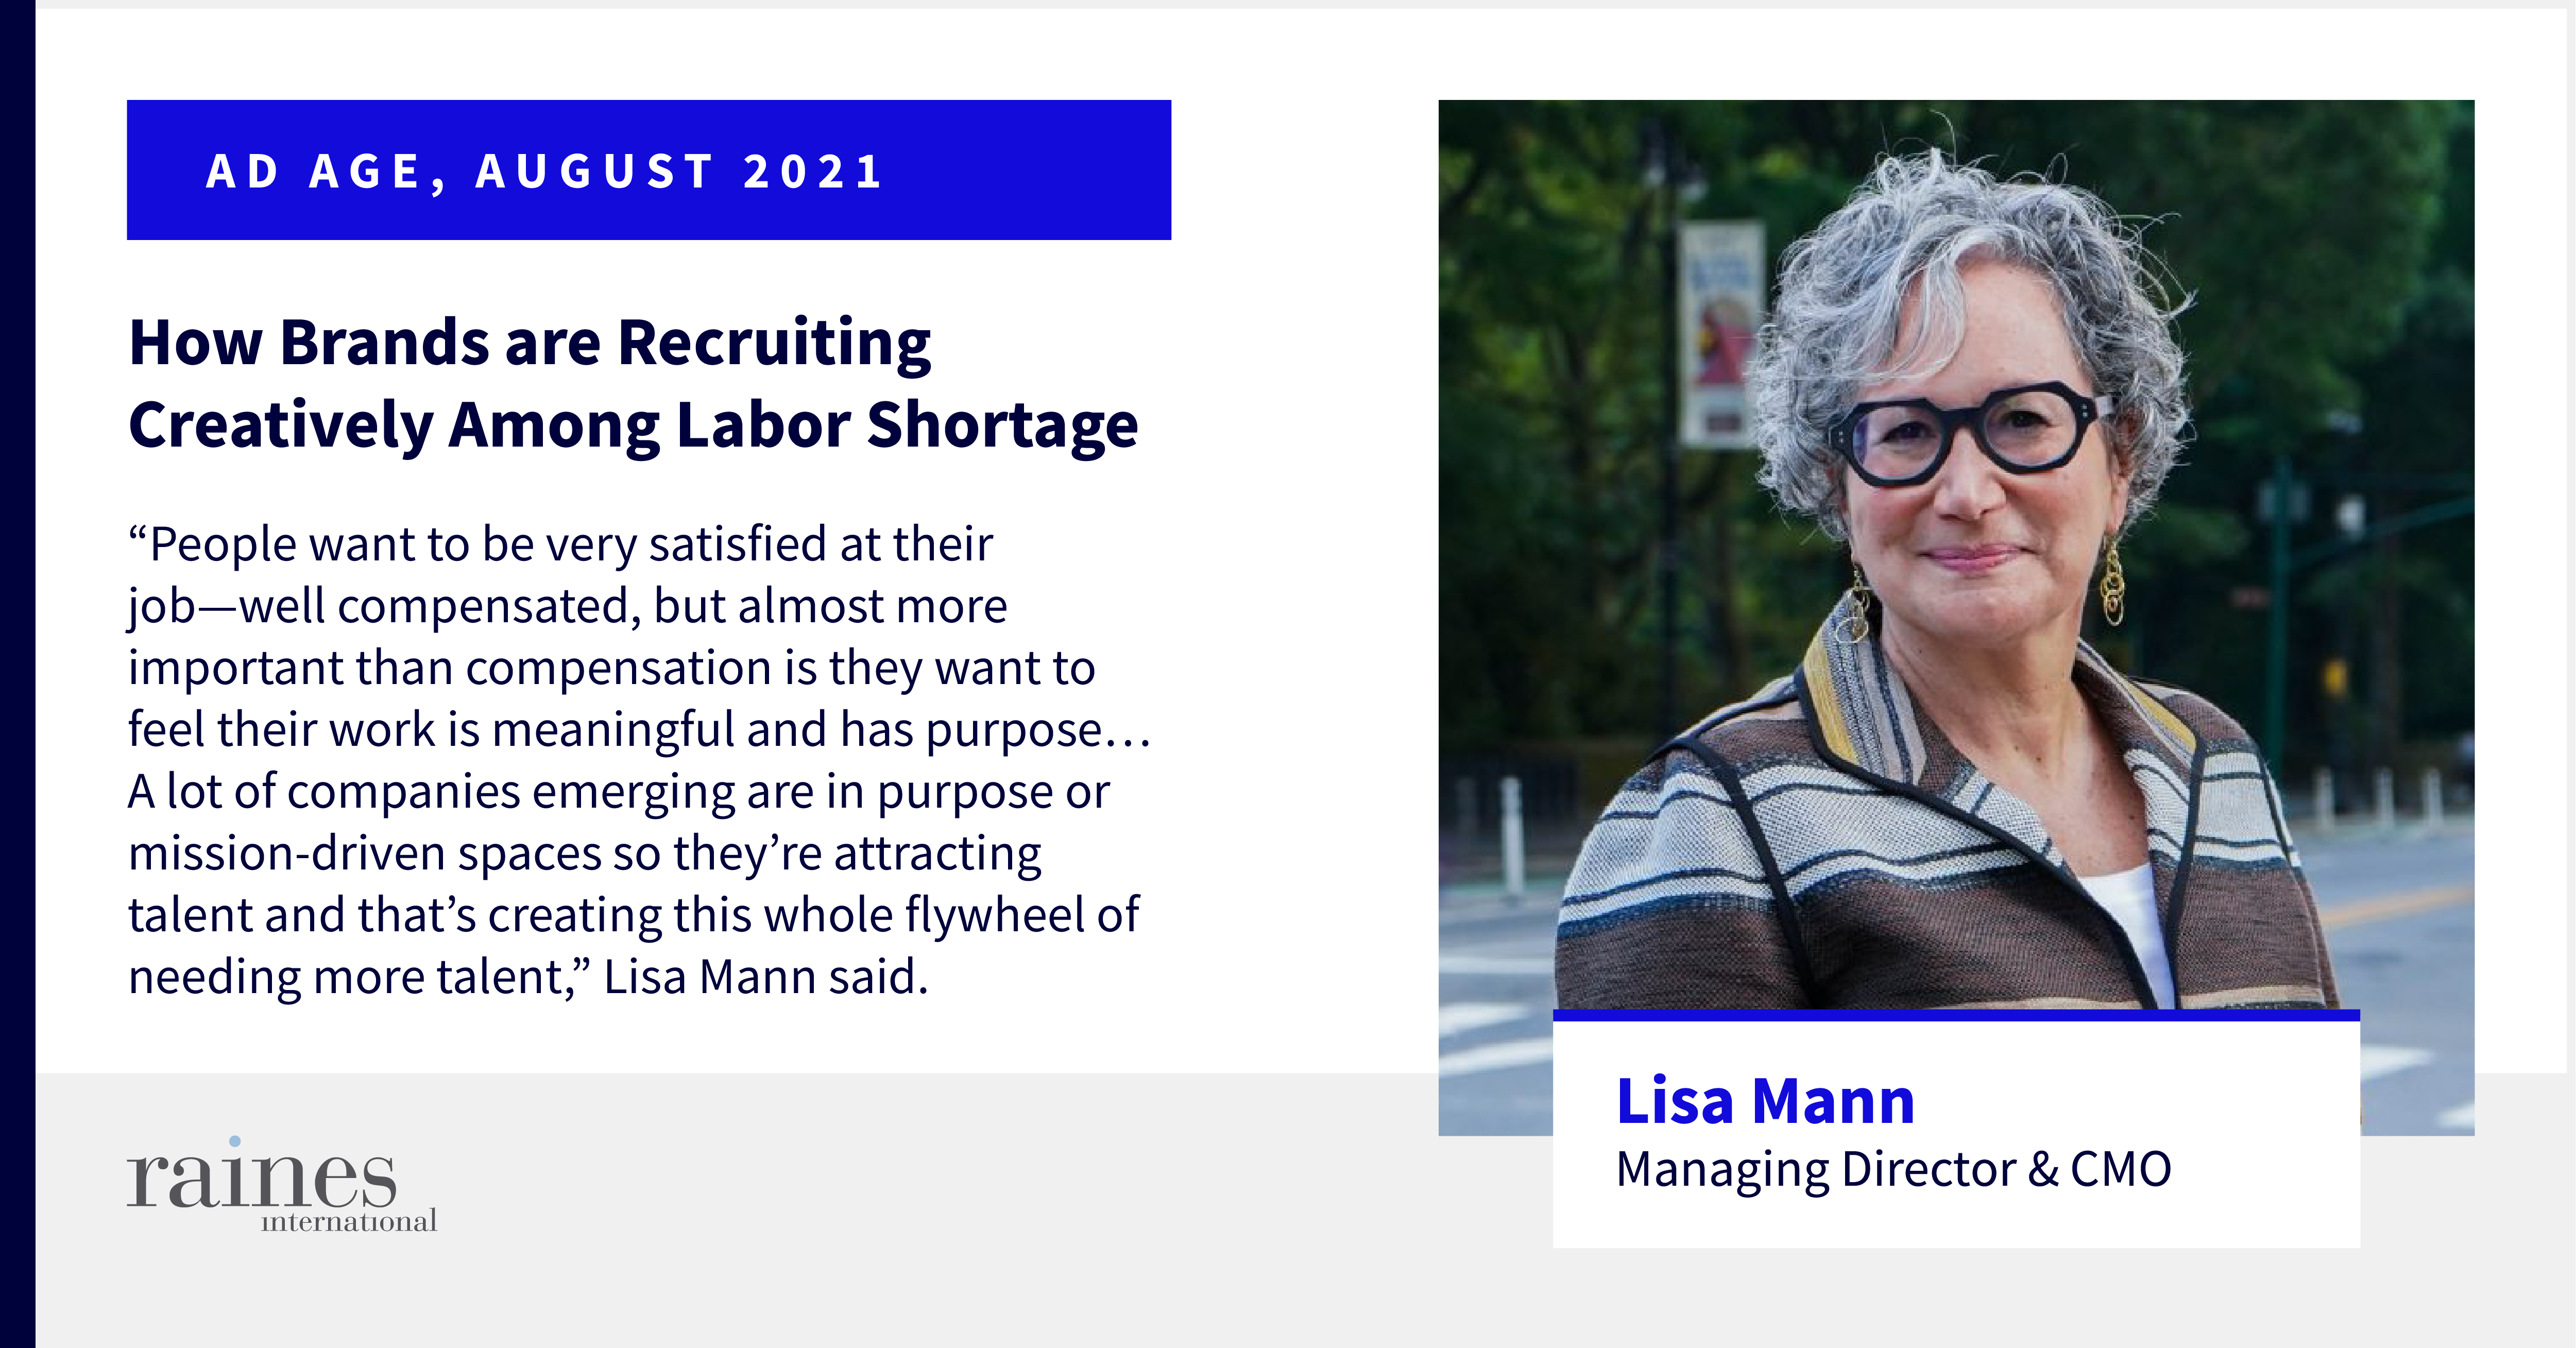 Lisa Mann Quote for Ad Age